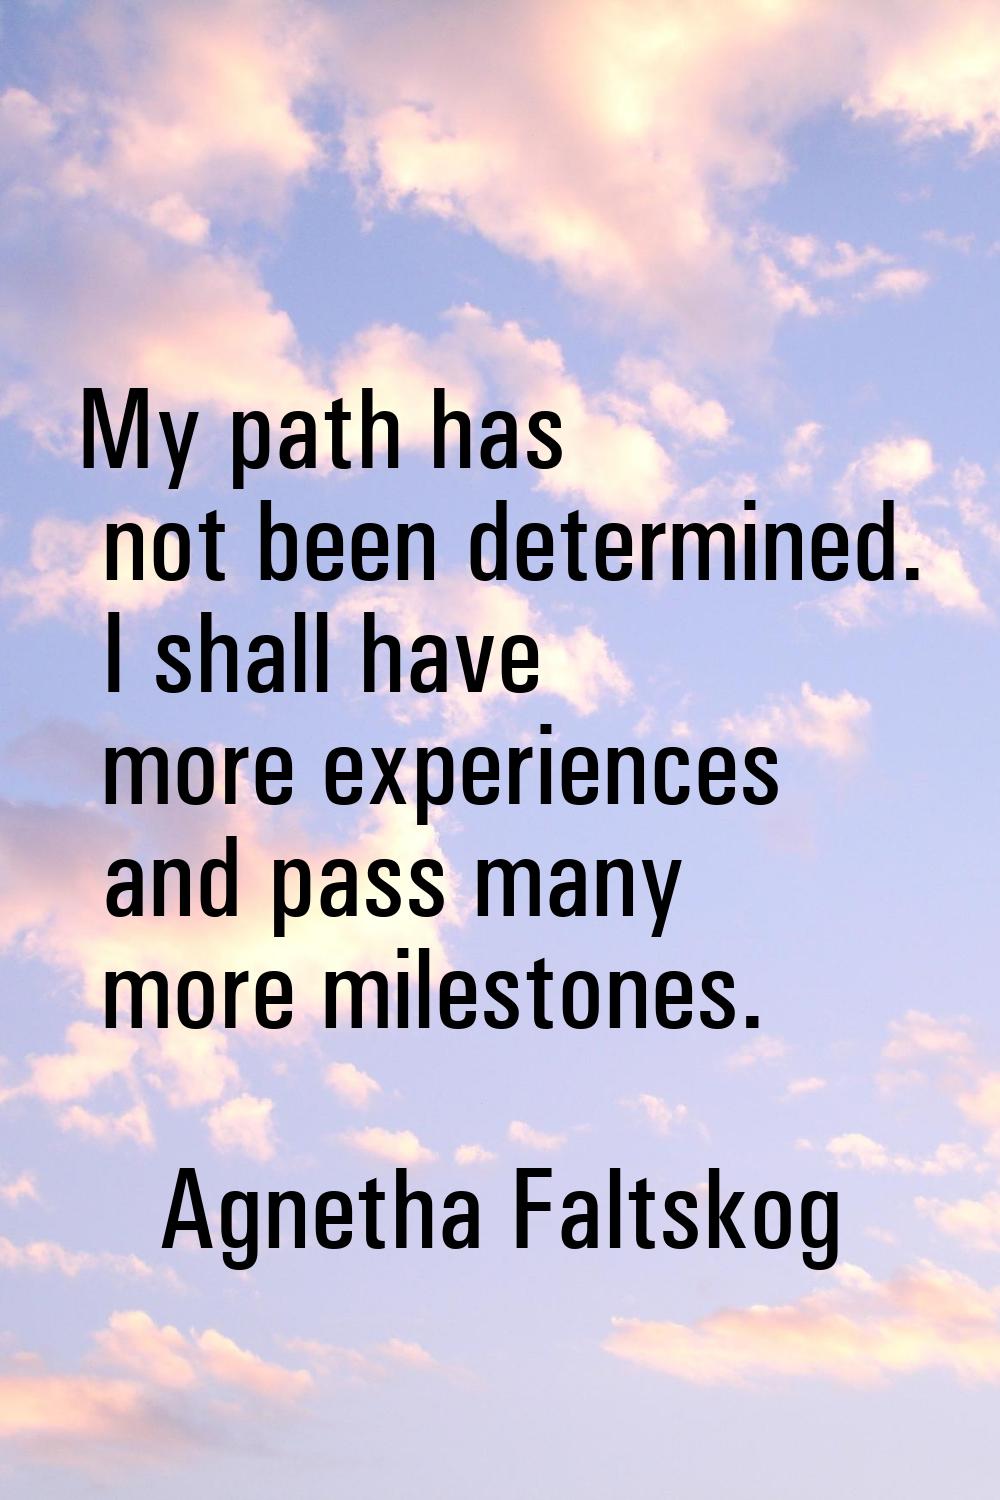 My path has not been determined. I shall have more experiences and pass many more milestones.